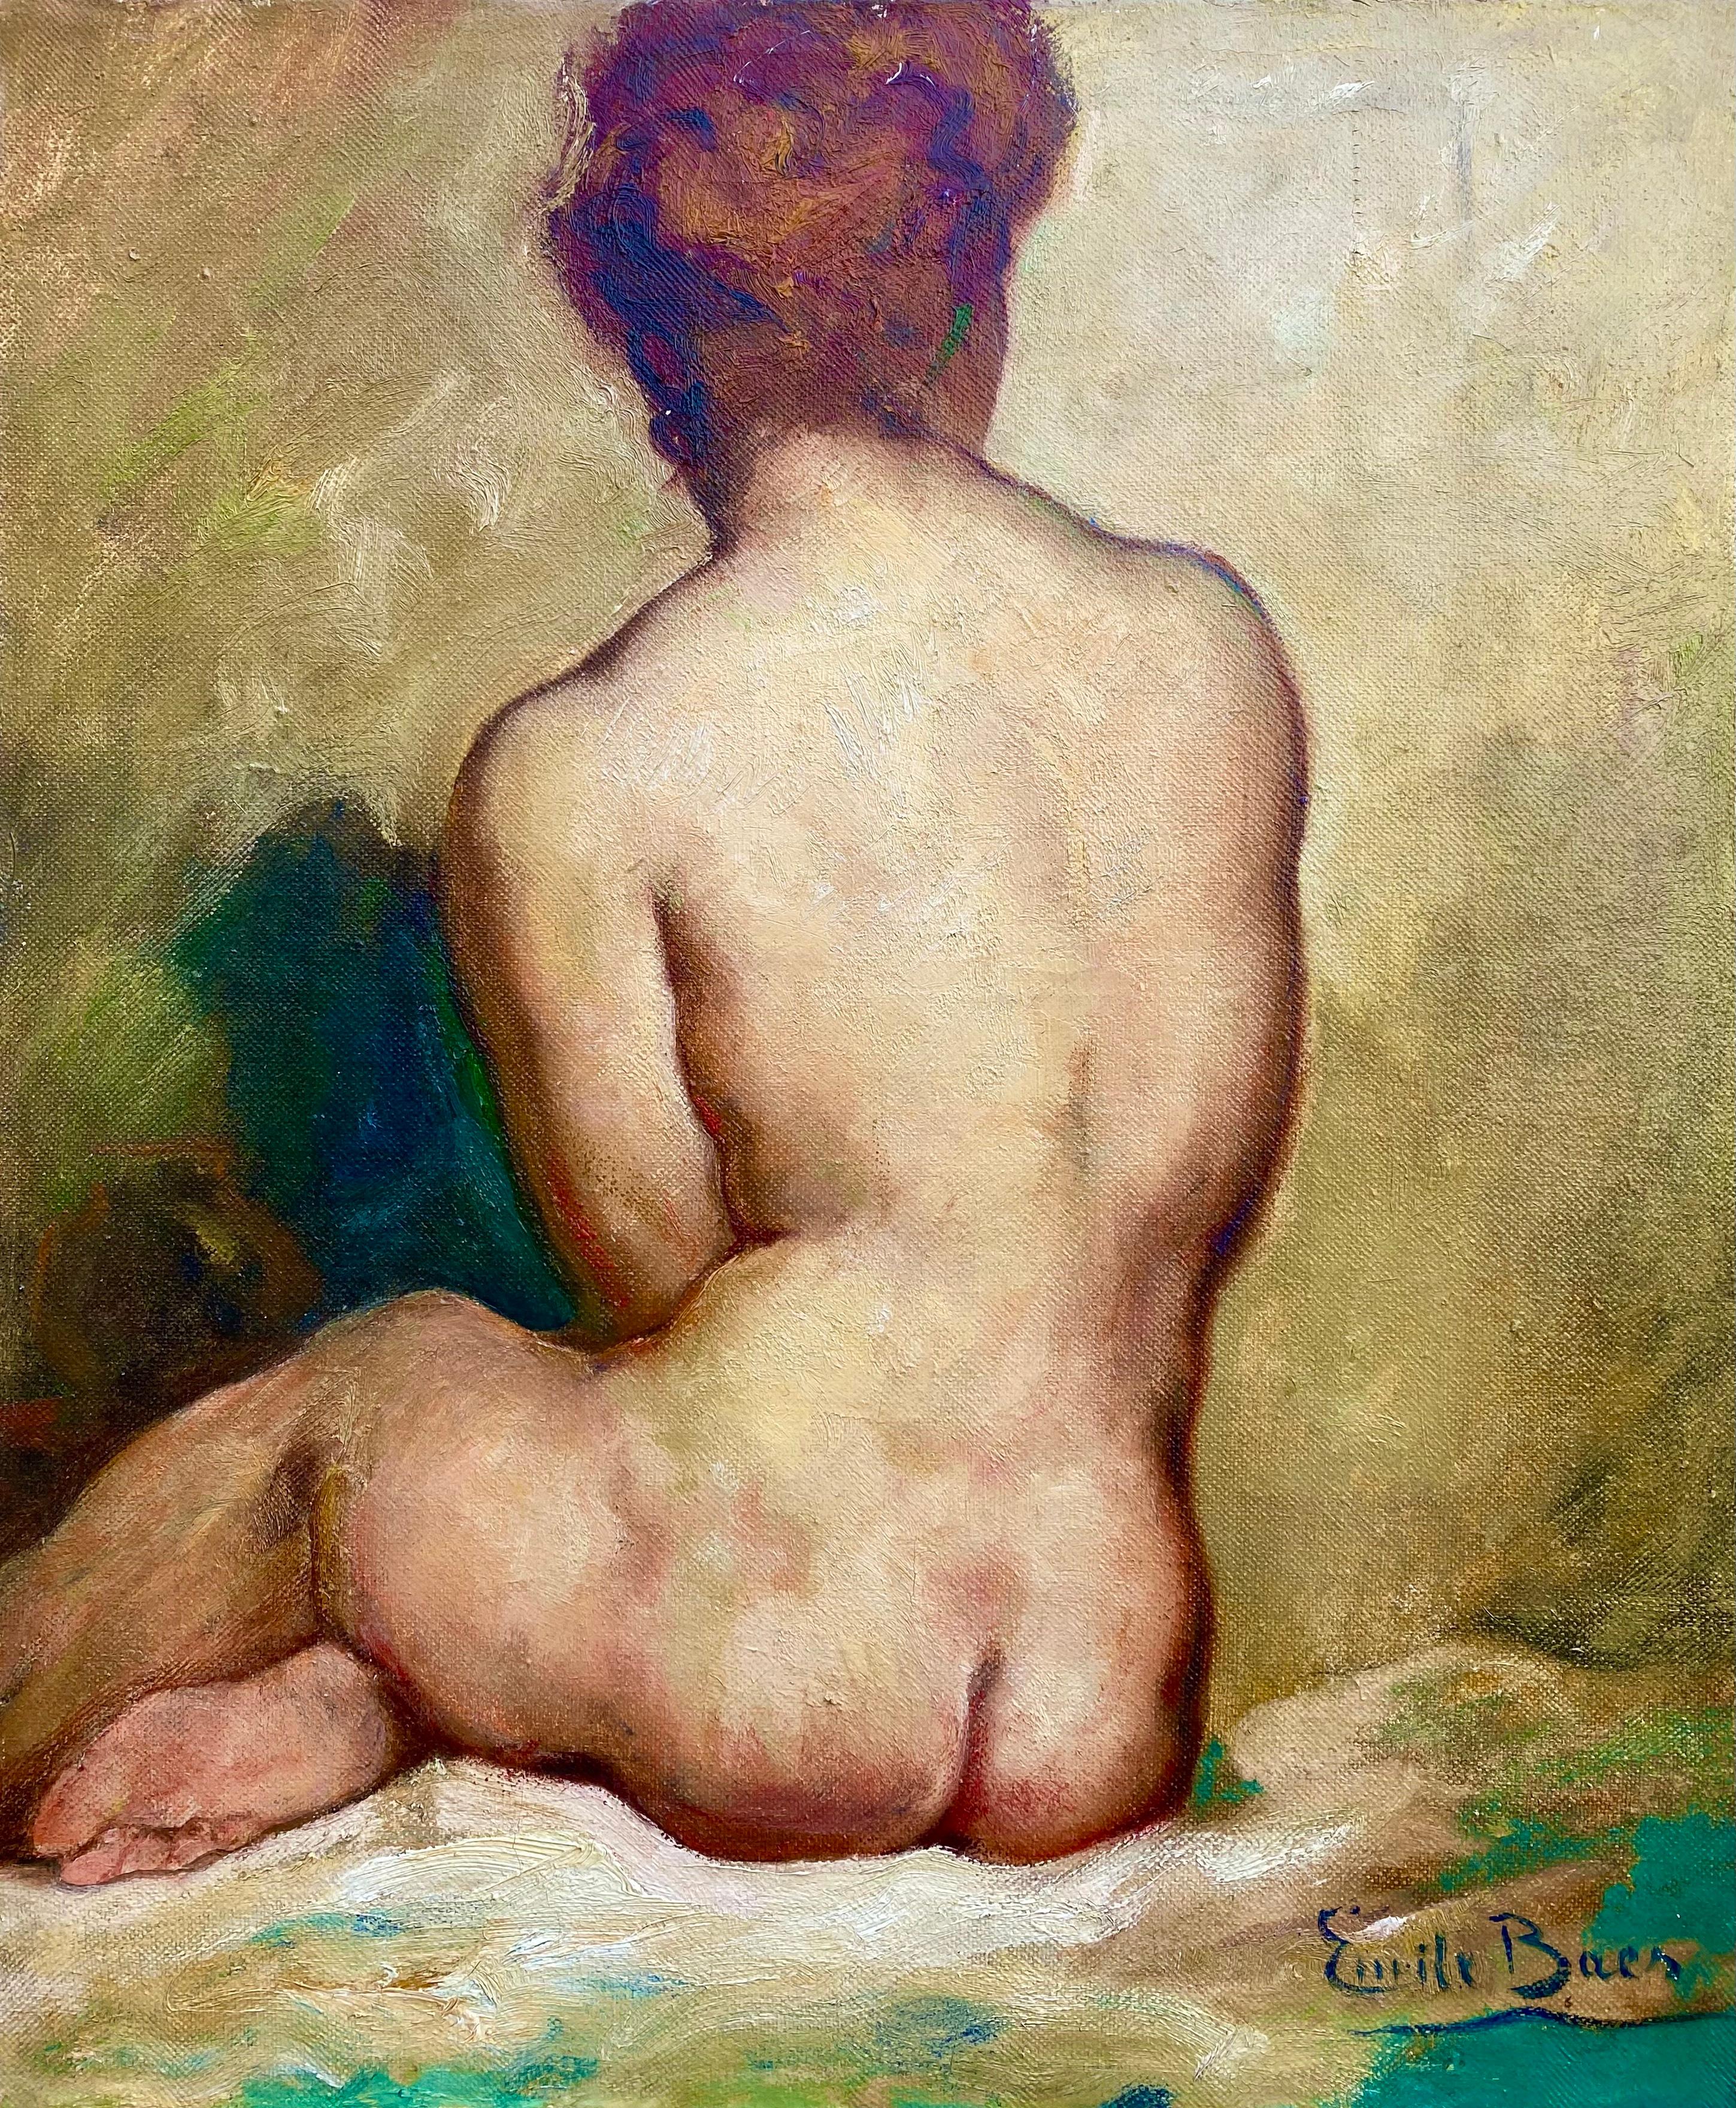 Baes Emile
Brussels 1879 – 1953 Paris
Belgian Painter

Female Nude
Signature: Signed bottom right
Medium: Oil on canvas
Dimensions: Image size 65 x 54 cm

Biography: Baes Emile was born in Brussels on November 12,  1879.

He was a painter of 